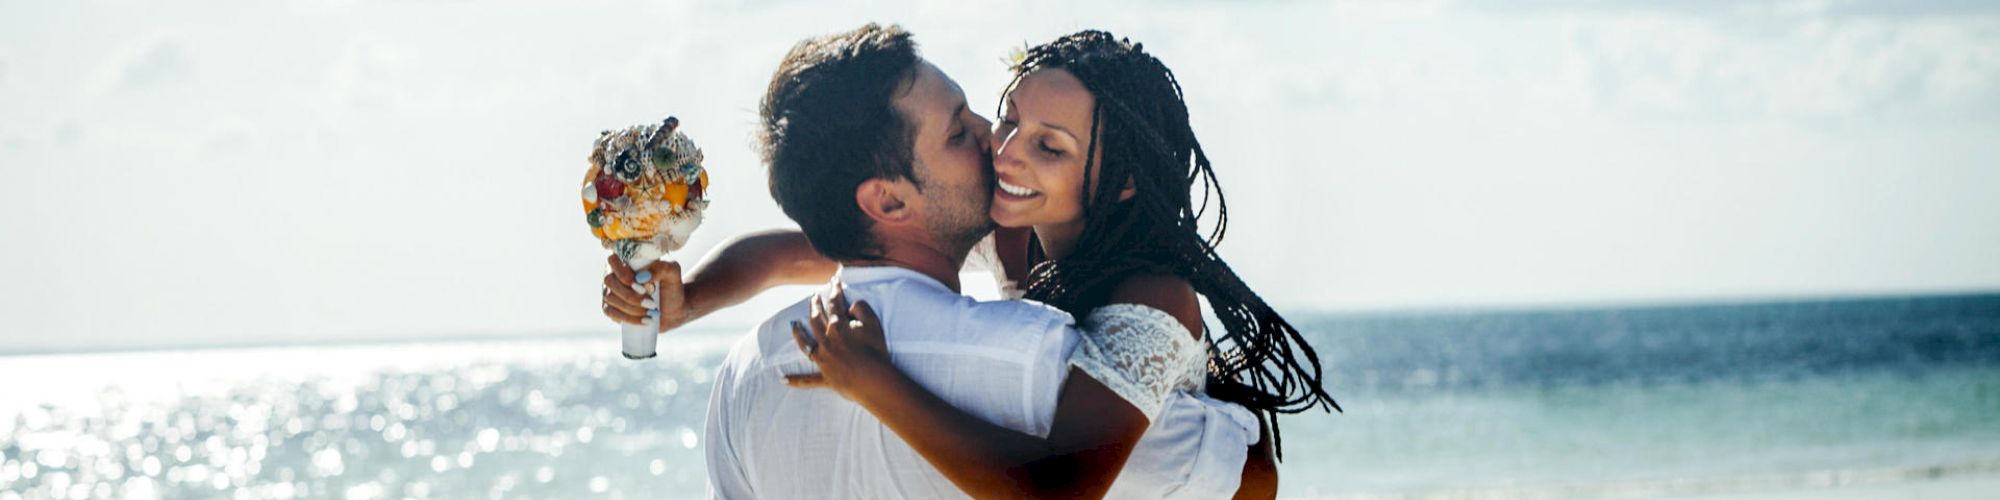 A couple is joyfully embracing on a beach; one person holding a bouquet, and the scene is set against a backdrop of the sea and the sky.